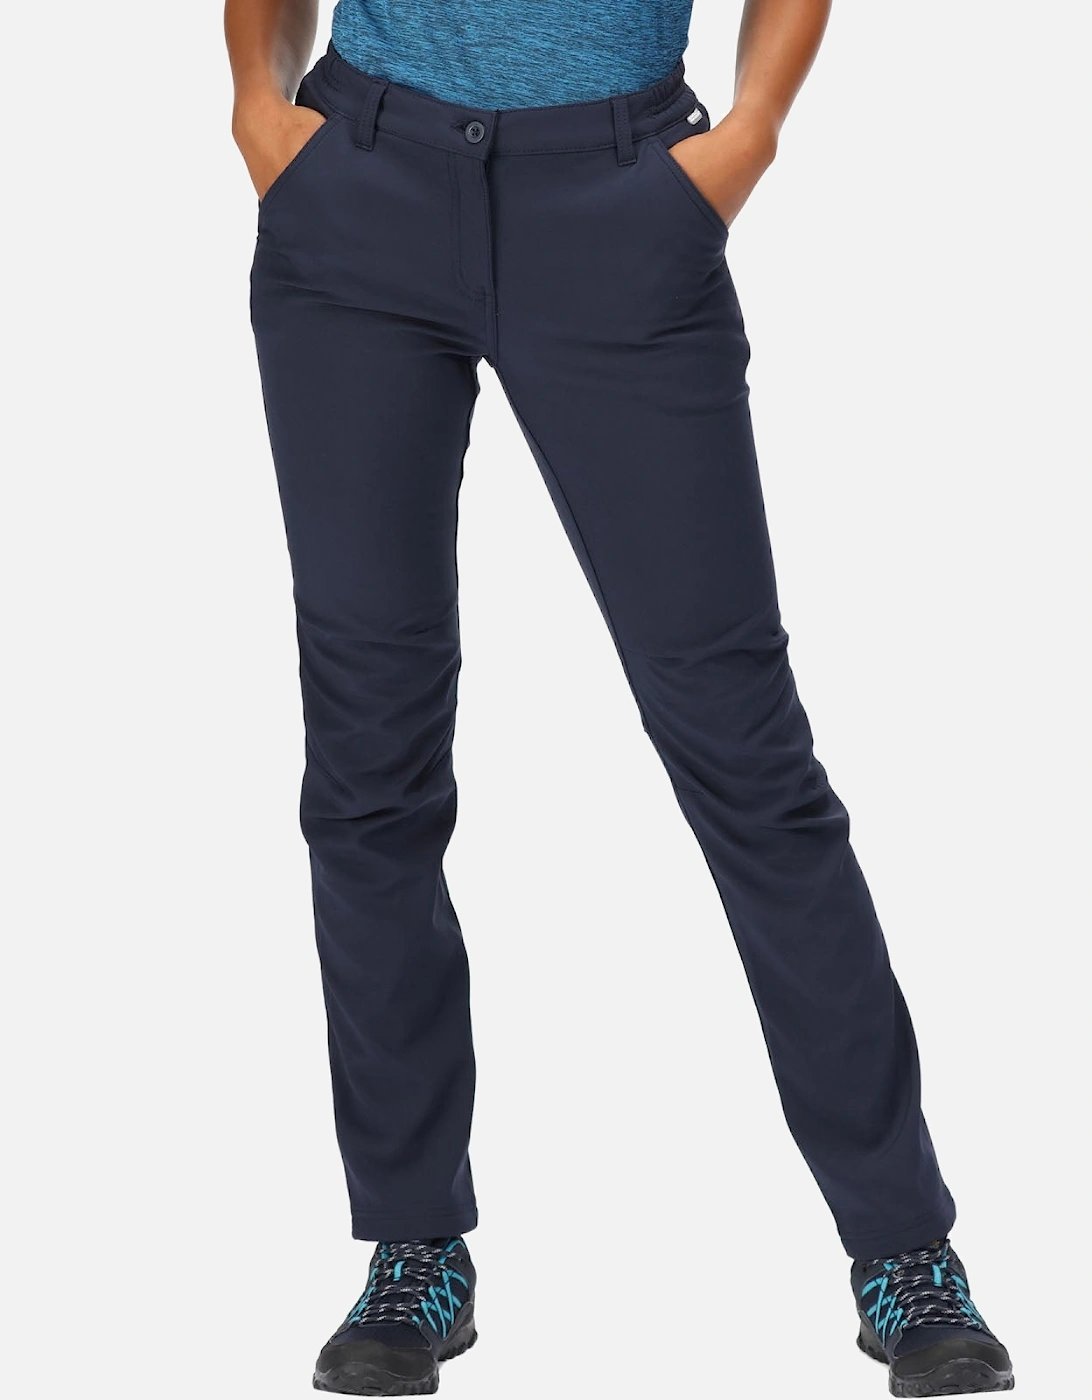 Womens Fenton Softshell Water Resistant Trousers - Navy, 6 of 5